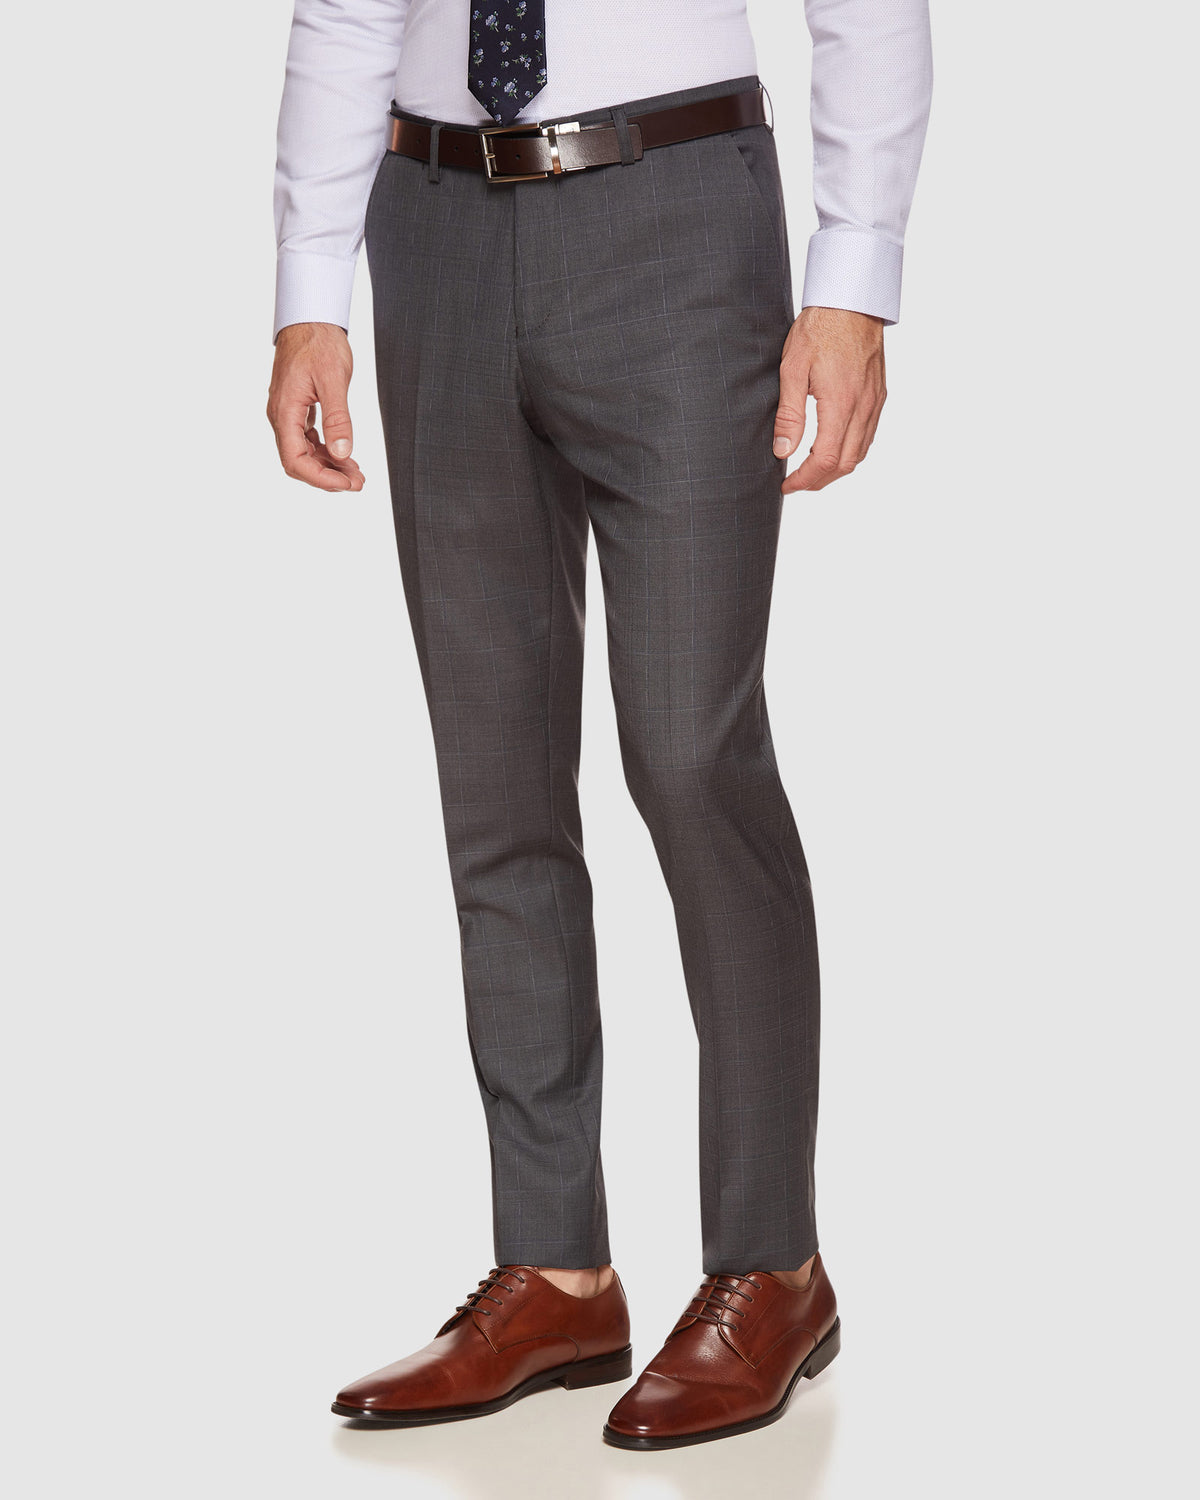 BYRON WOOL STRETCH CHECK SUIT SET CHARCOAL